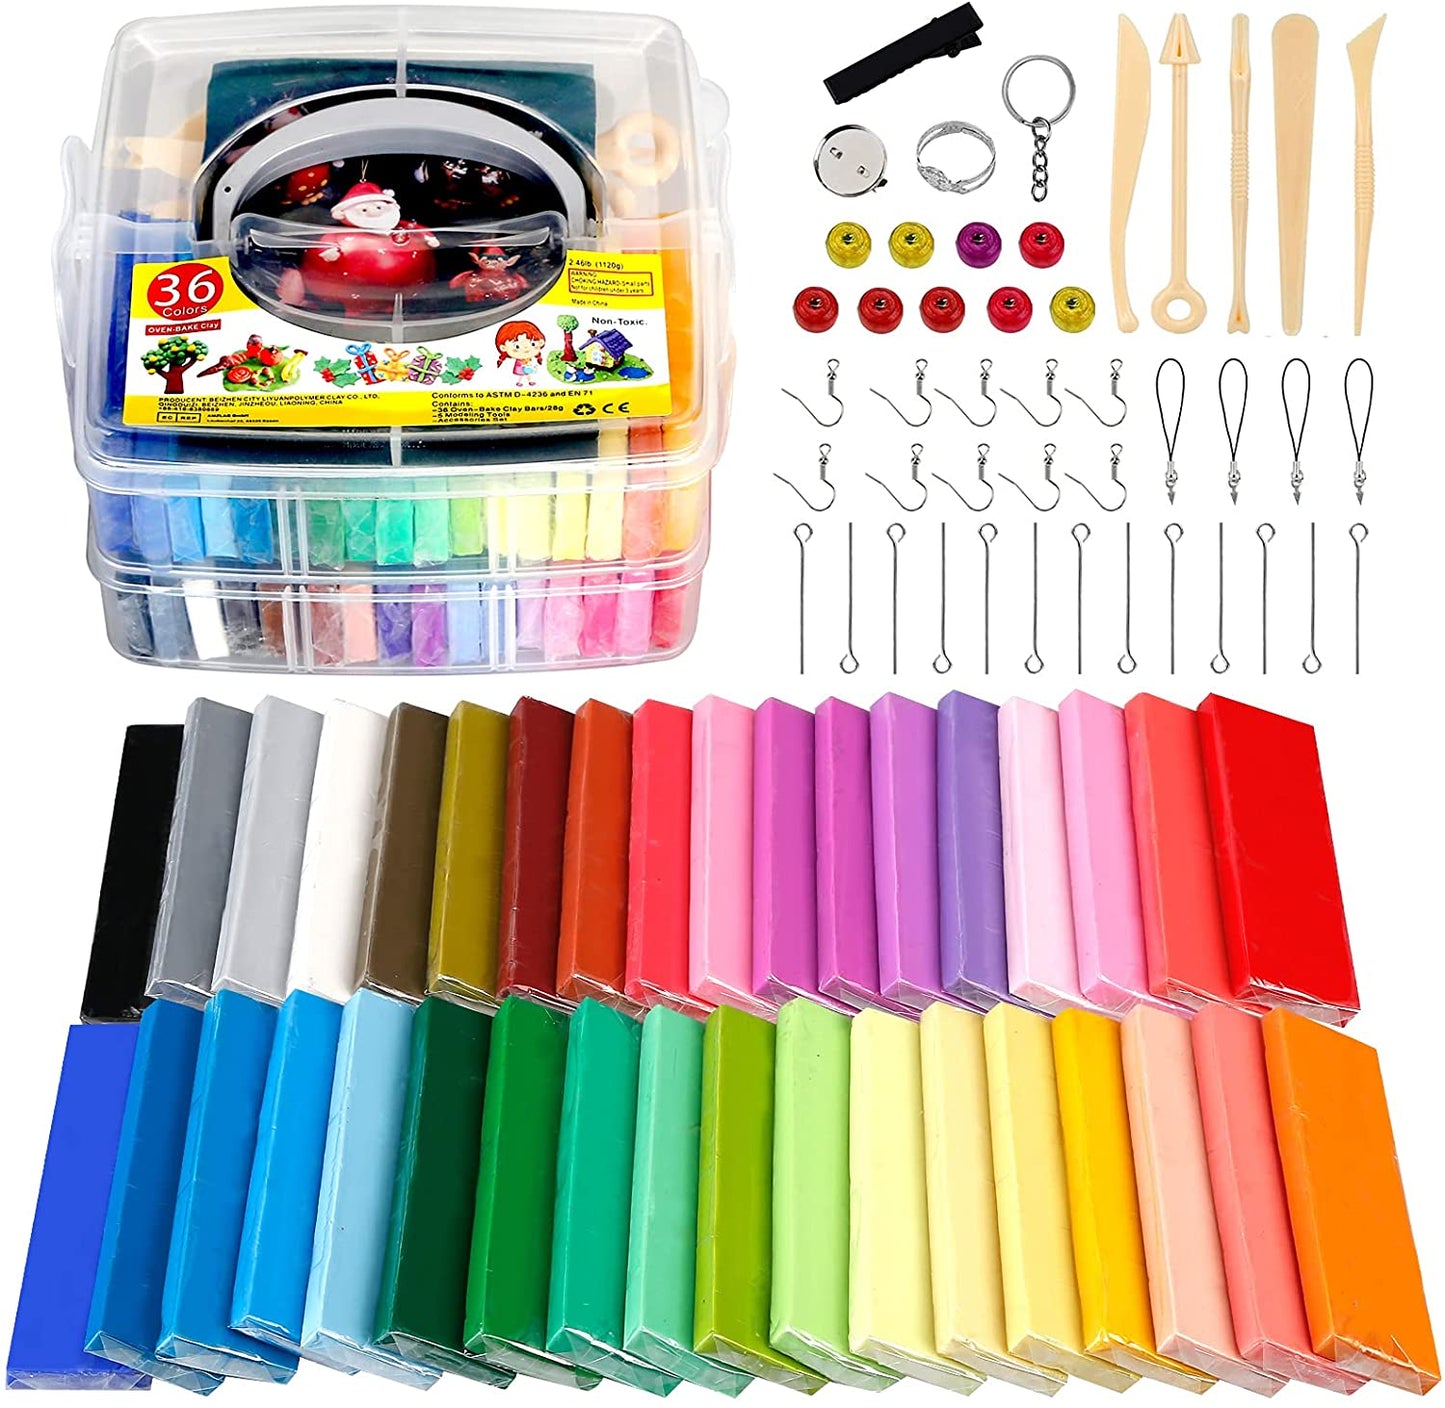 Polymer Clay Starter Kit - Oven Bake Modeling Clay with Sculpting Tools -  79 Pieces - 50 Vibrant Colors - Great for Jewelry Making